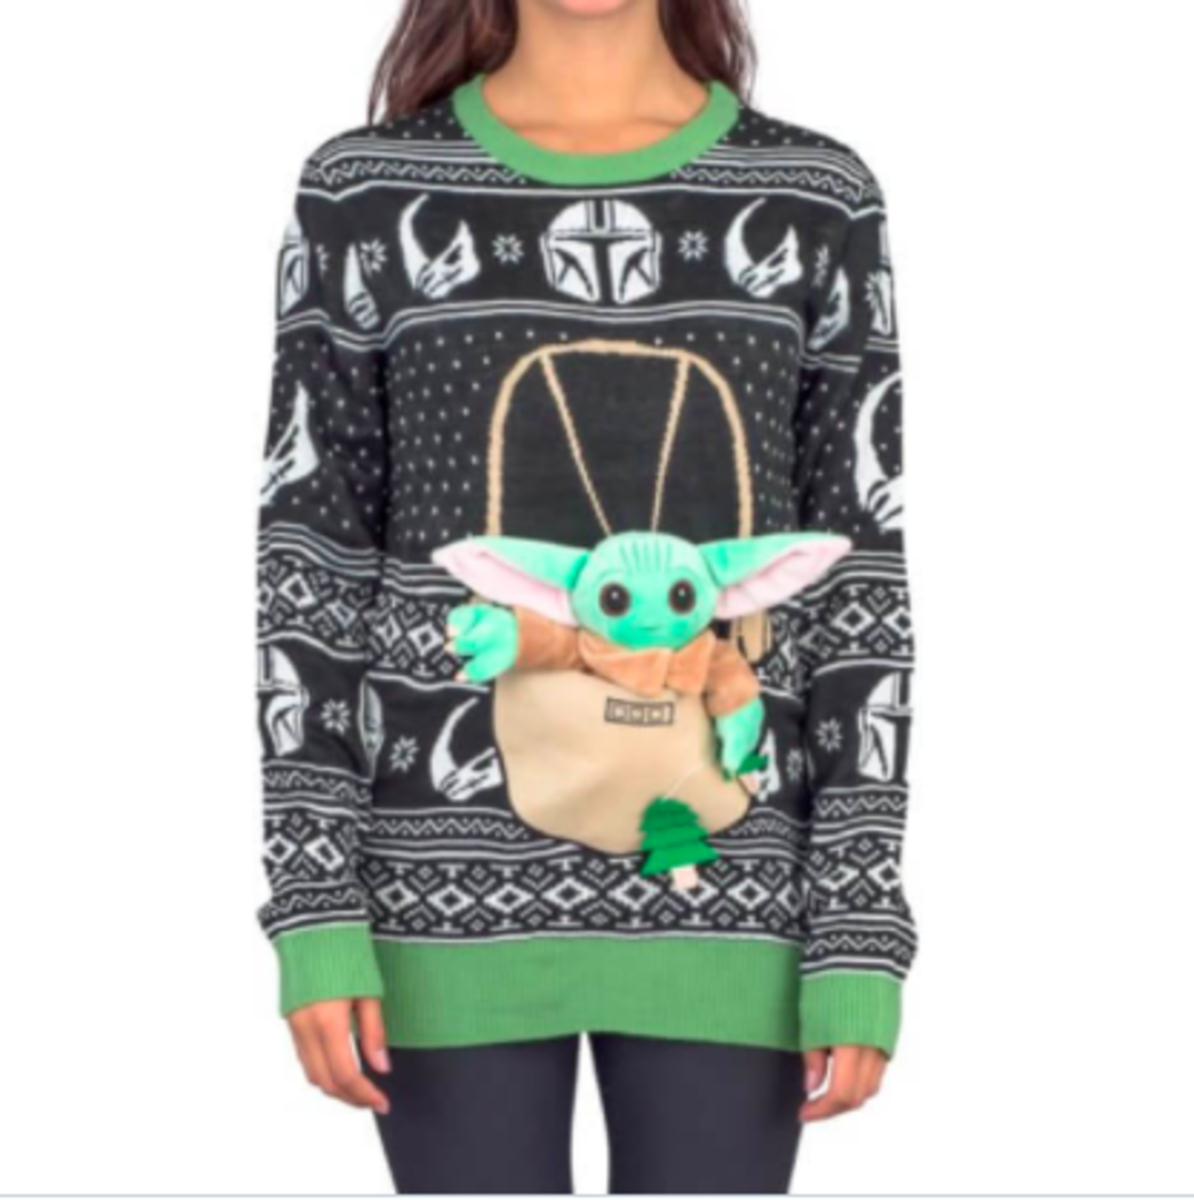 Get Yourself an Ugly Christmas Sweater